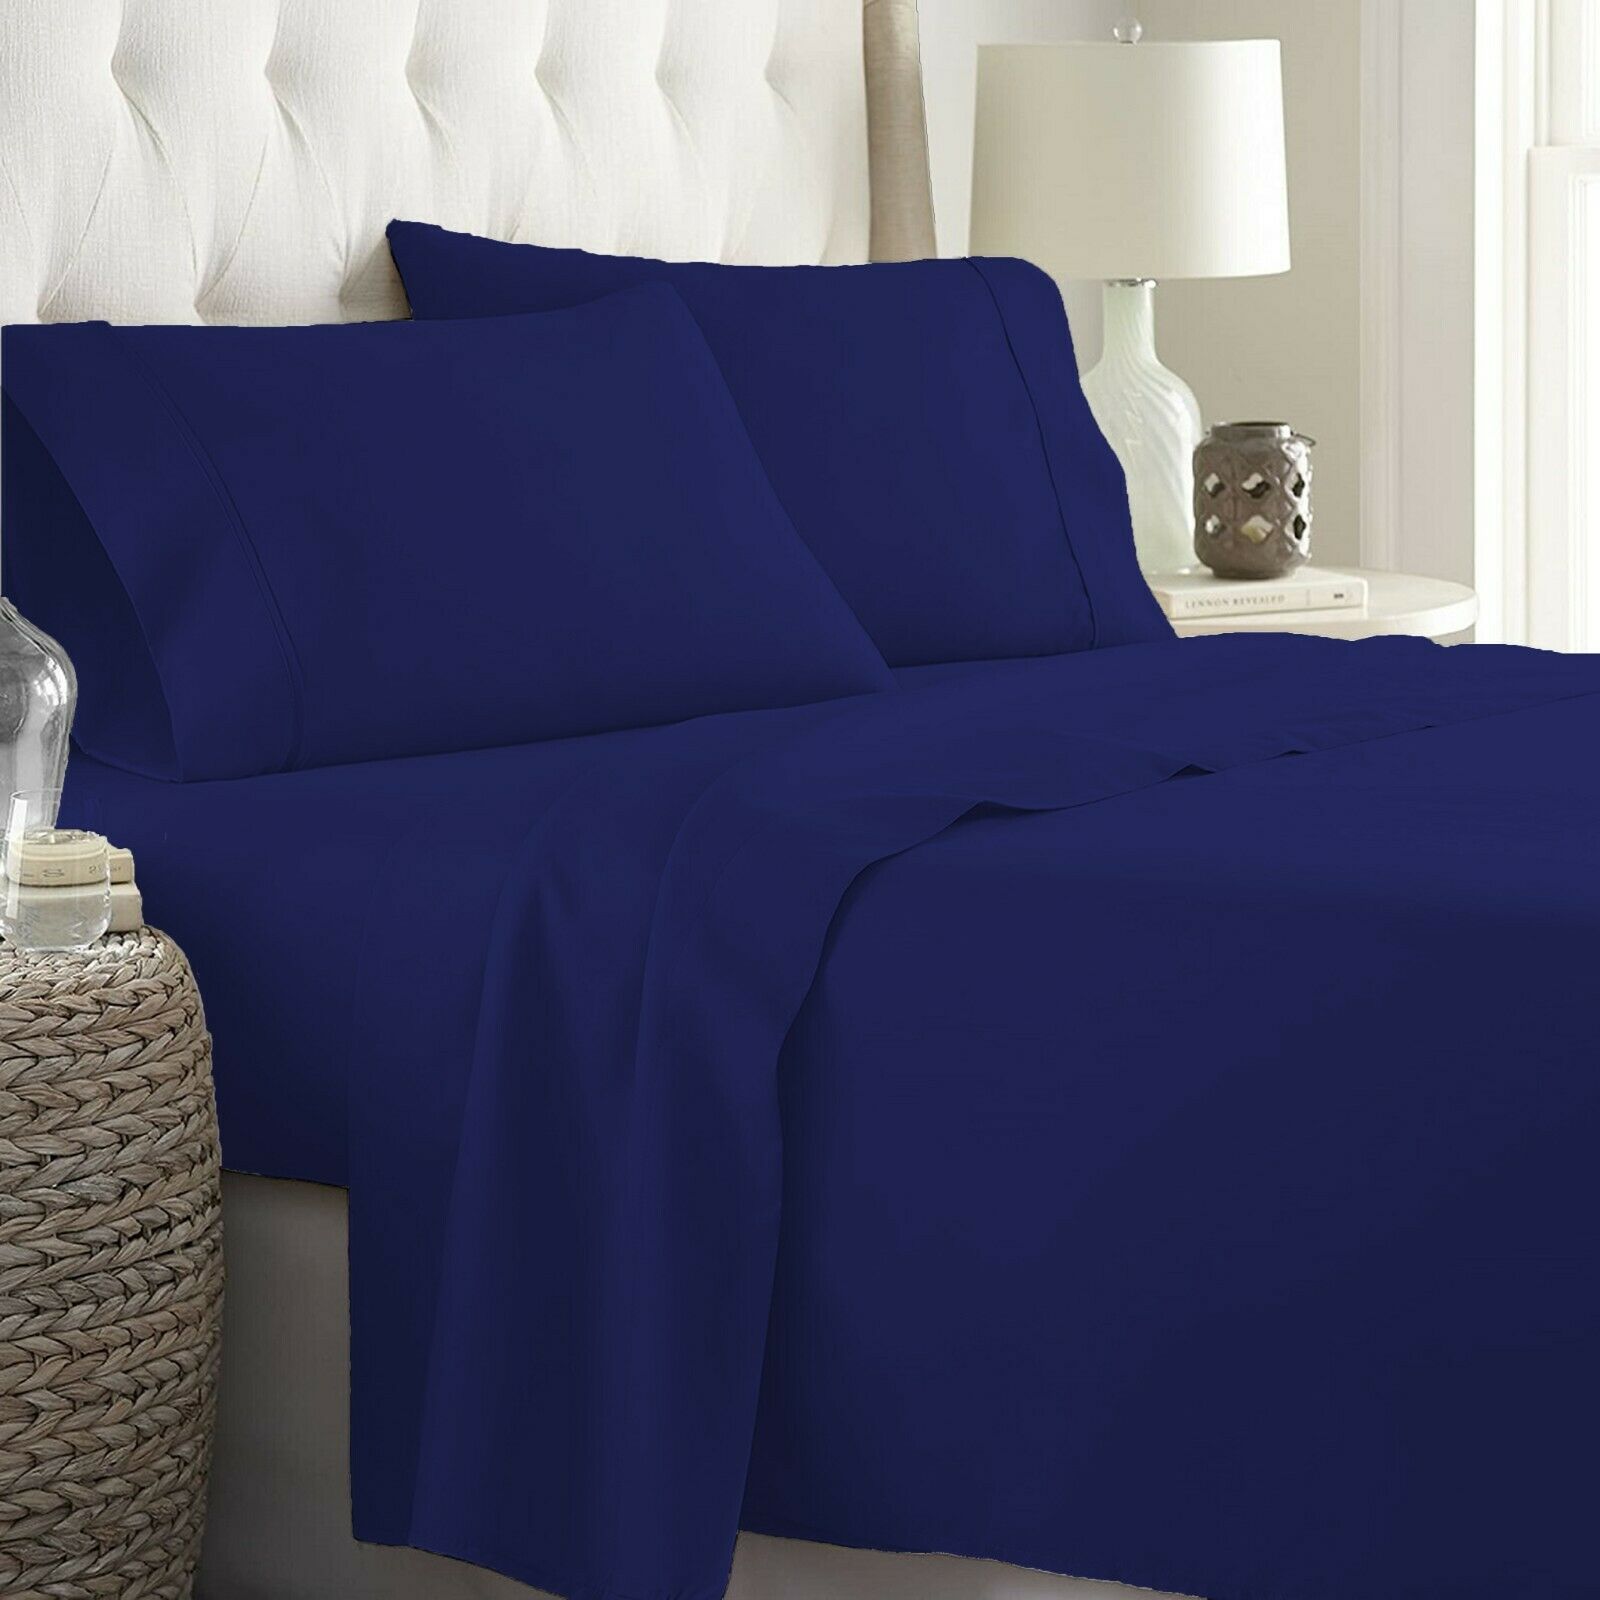 21 Inch Pocket Fitted Sheets Egyptian Cotton Navy Blue at-EgyptianHomeLinens.com